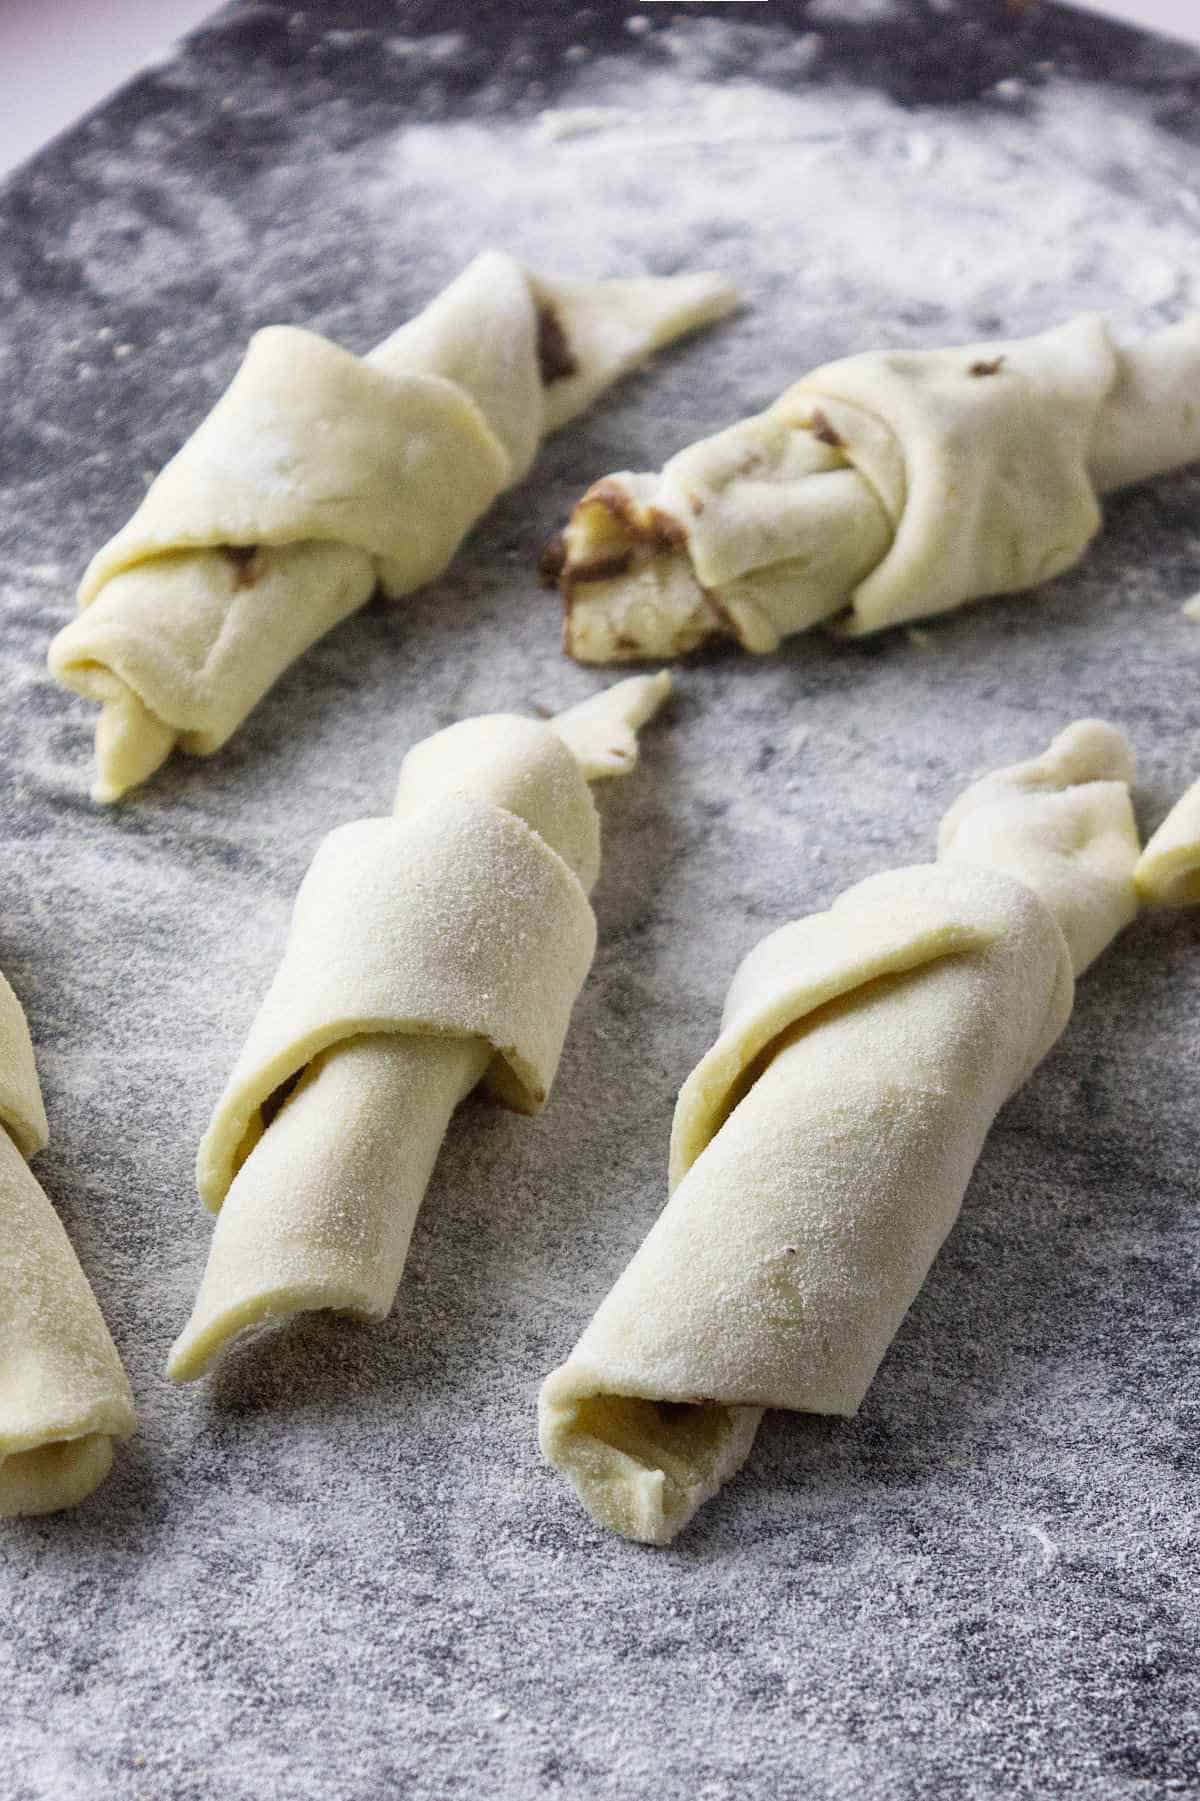 puff pastry rolled up with filling inside.